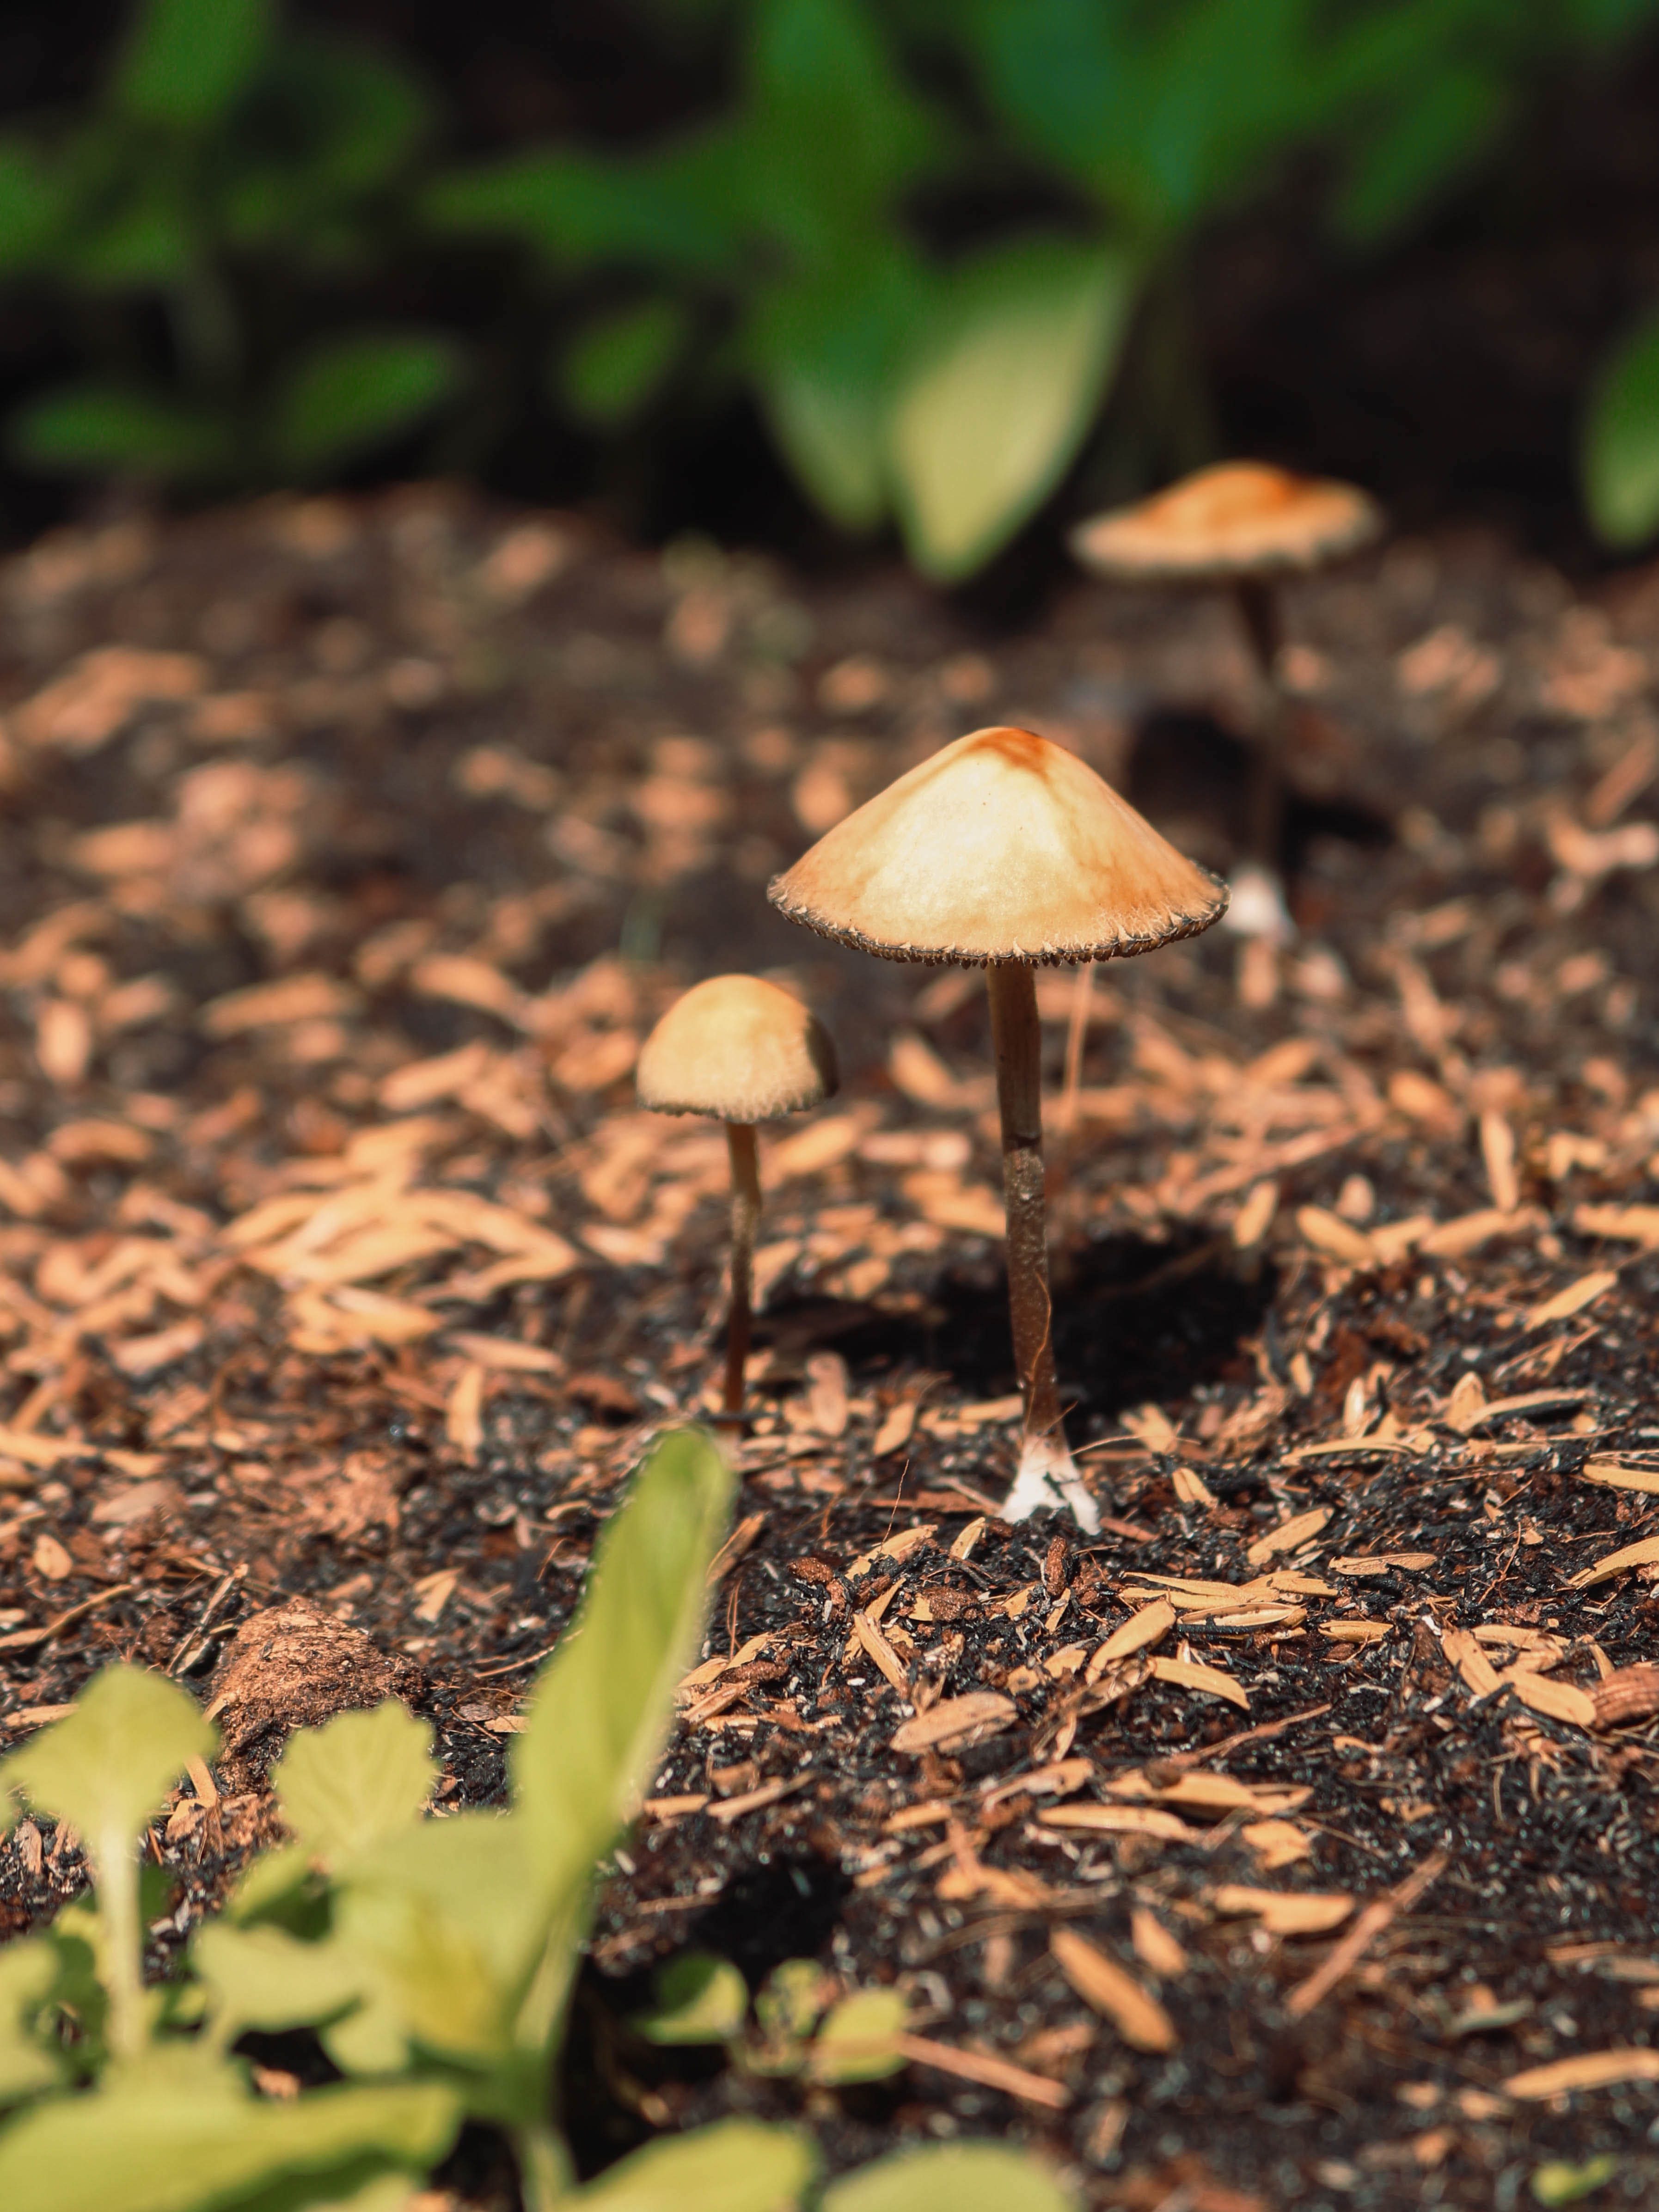 A mushroom growing in a natural environment.